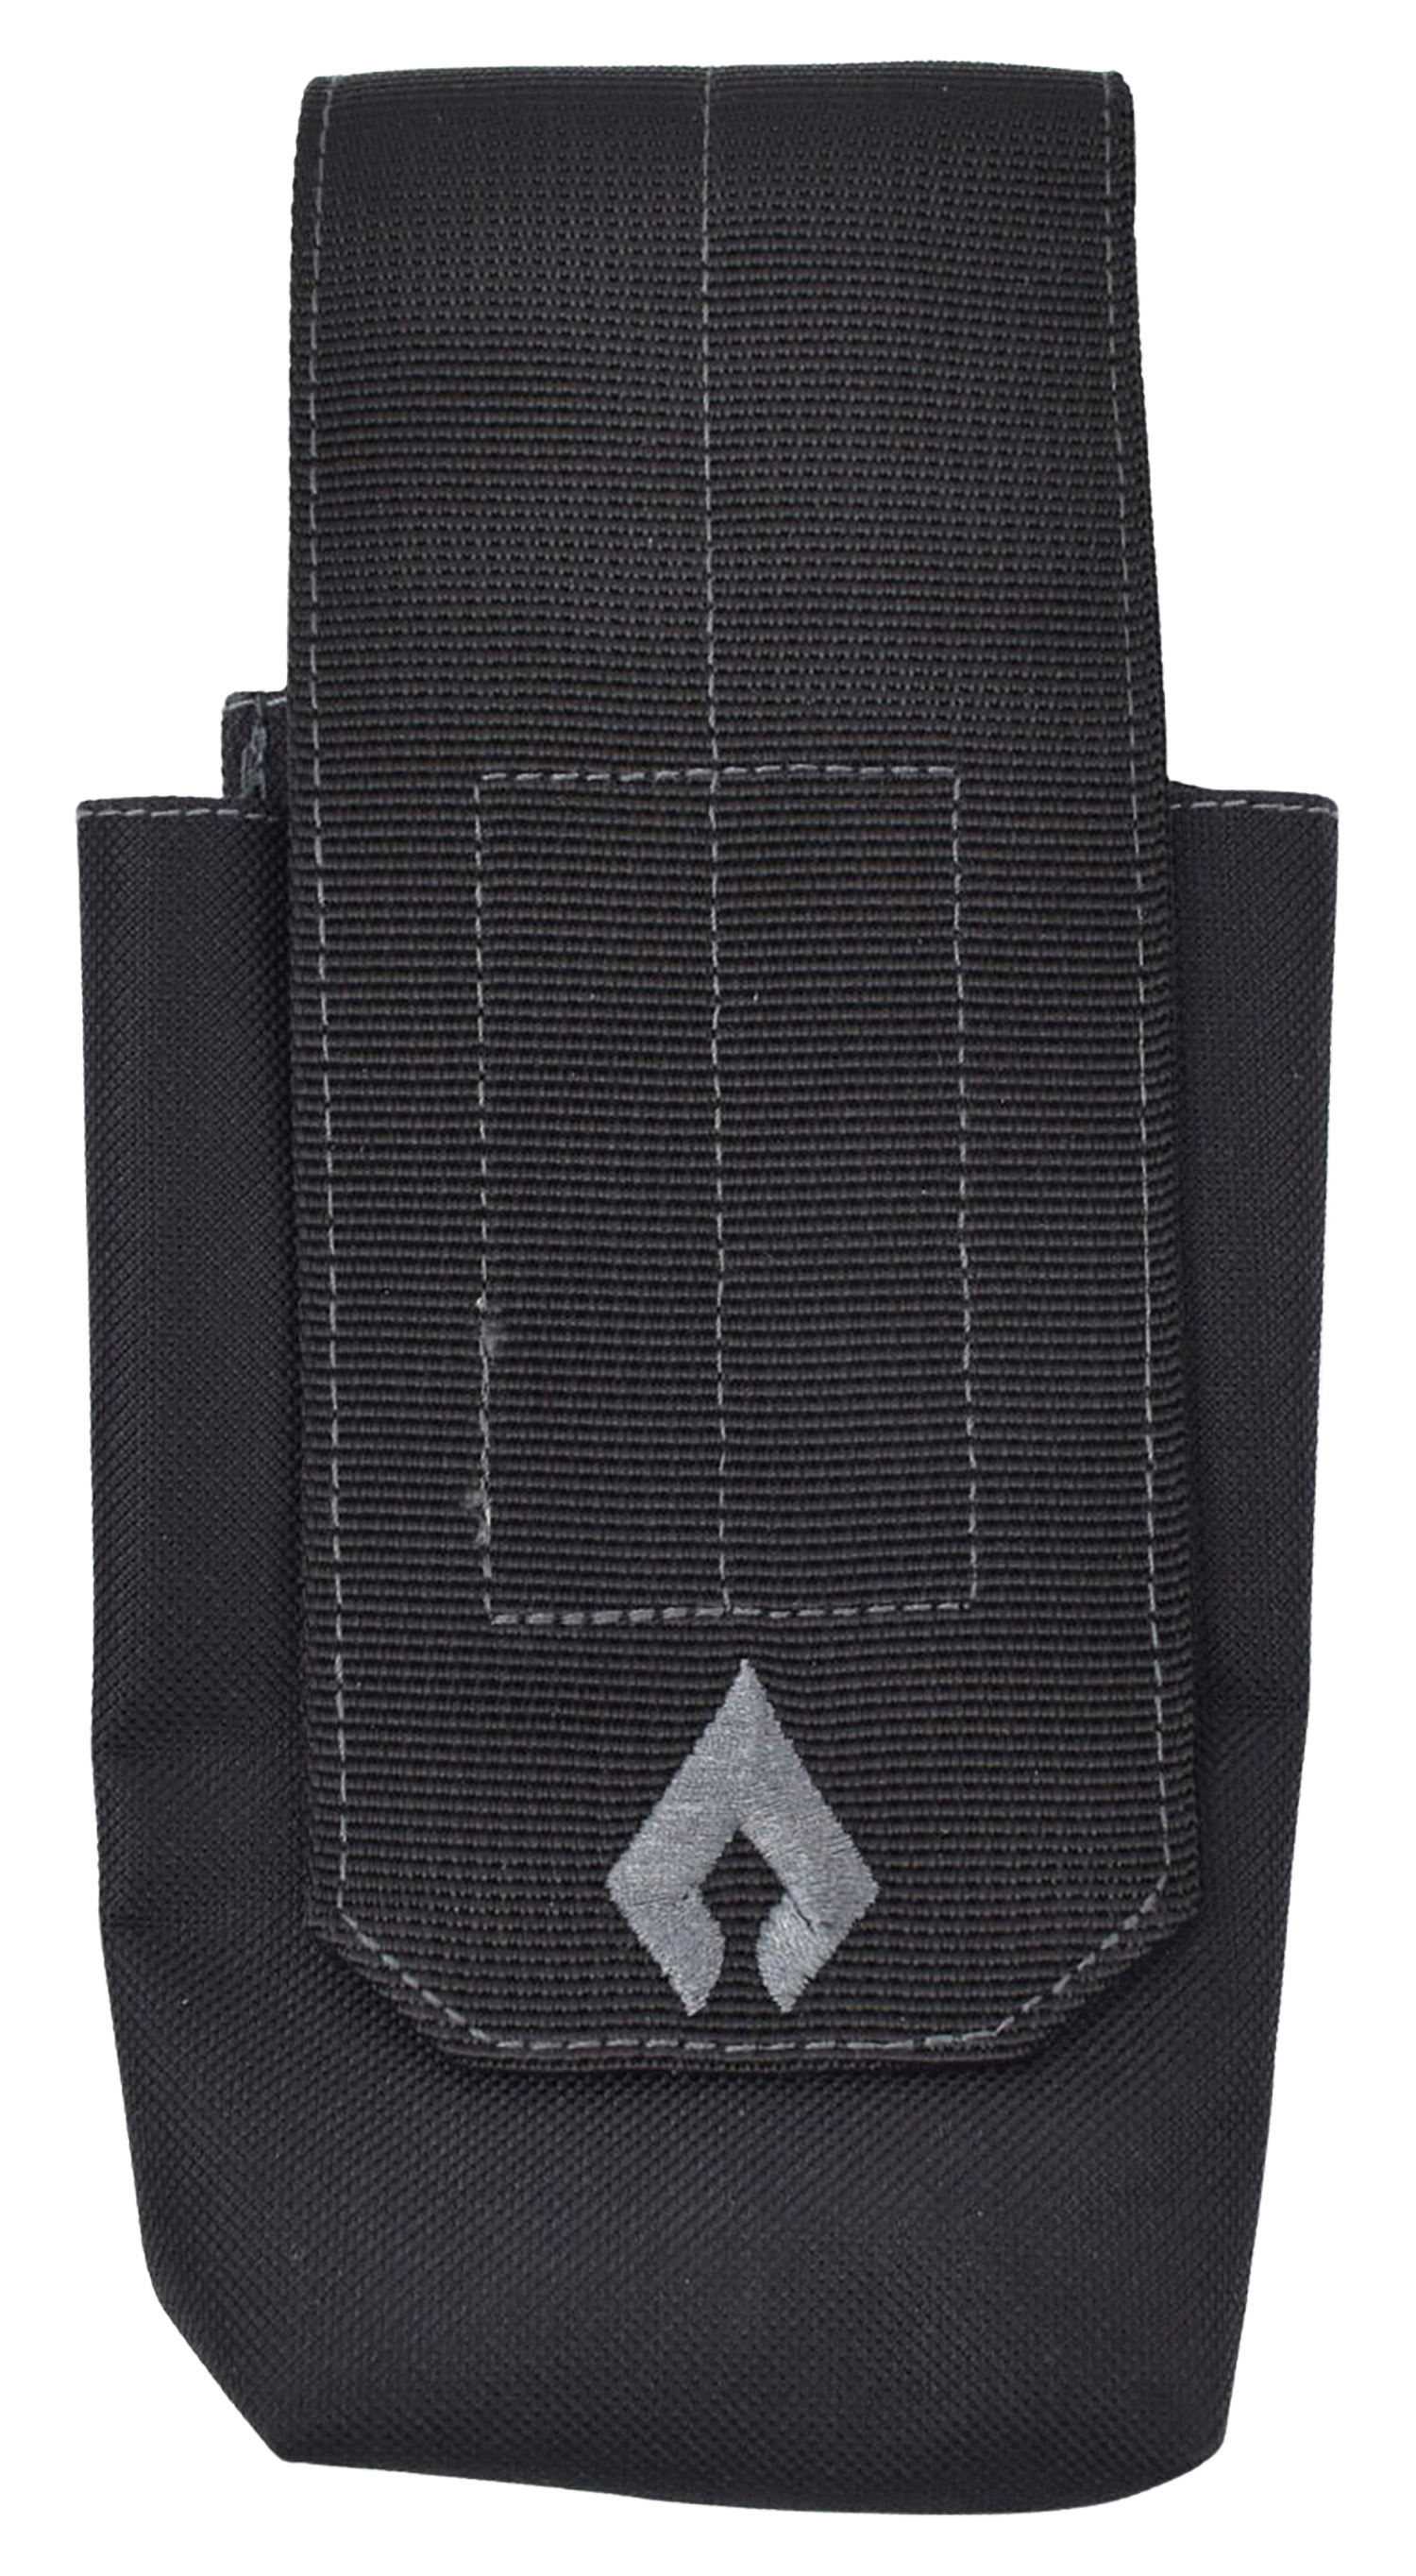 Advance Warrior Solutions ARSMPBL Single Mag Pouch Rifle Black MOLLE